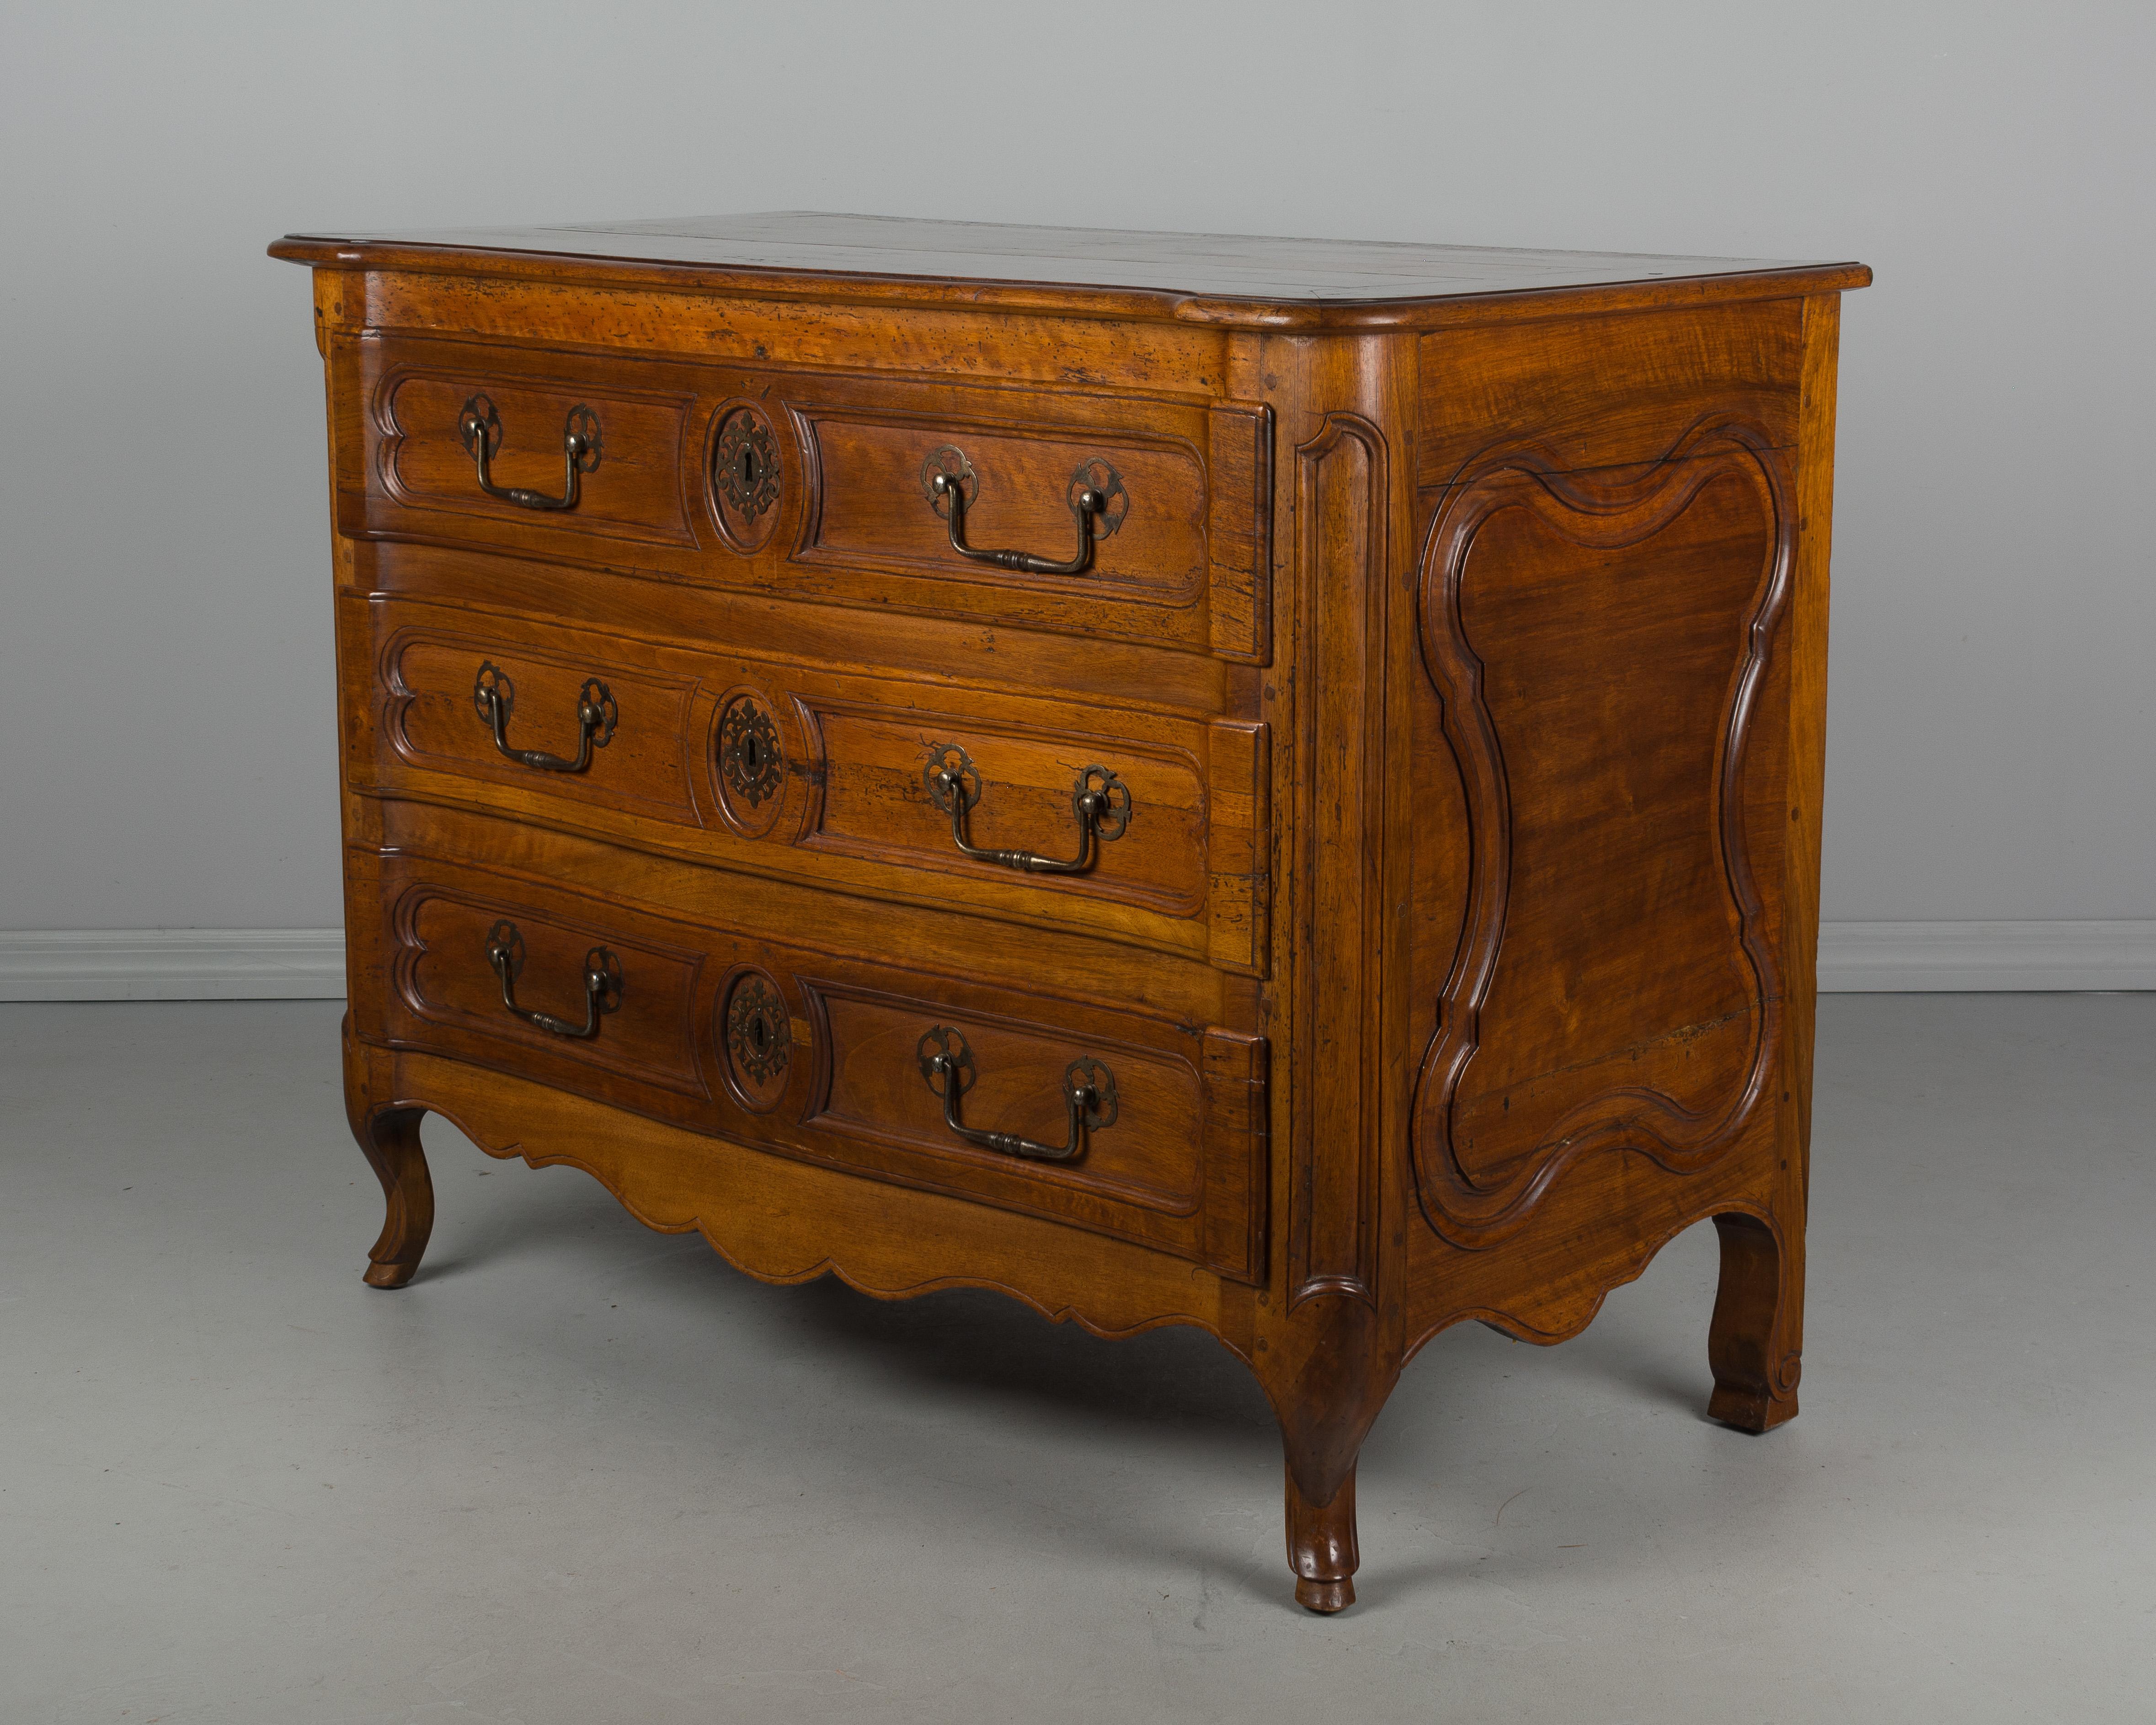 A late 18th century French Louis XV style walnut commode from Lyon. Slightly curved front and subtle carved details including shaped side panels and a scalloped apron. Iron hardware is as found. Locks are present, but there is no key. Large